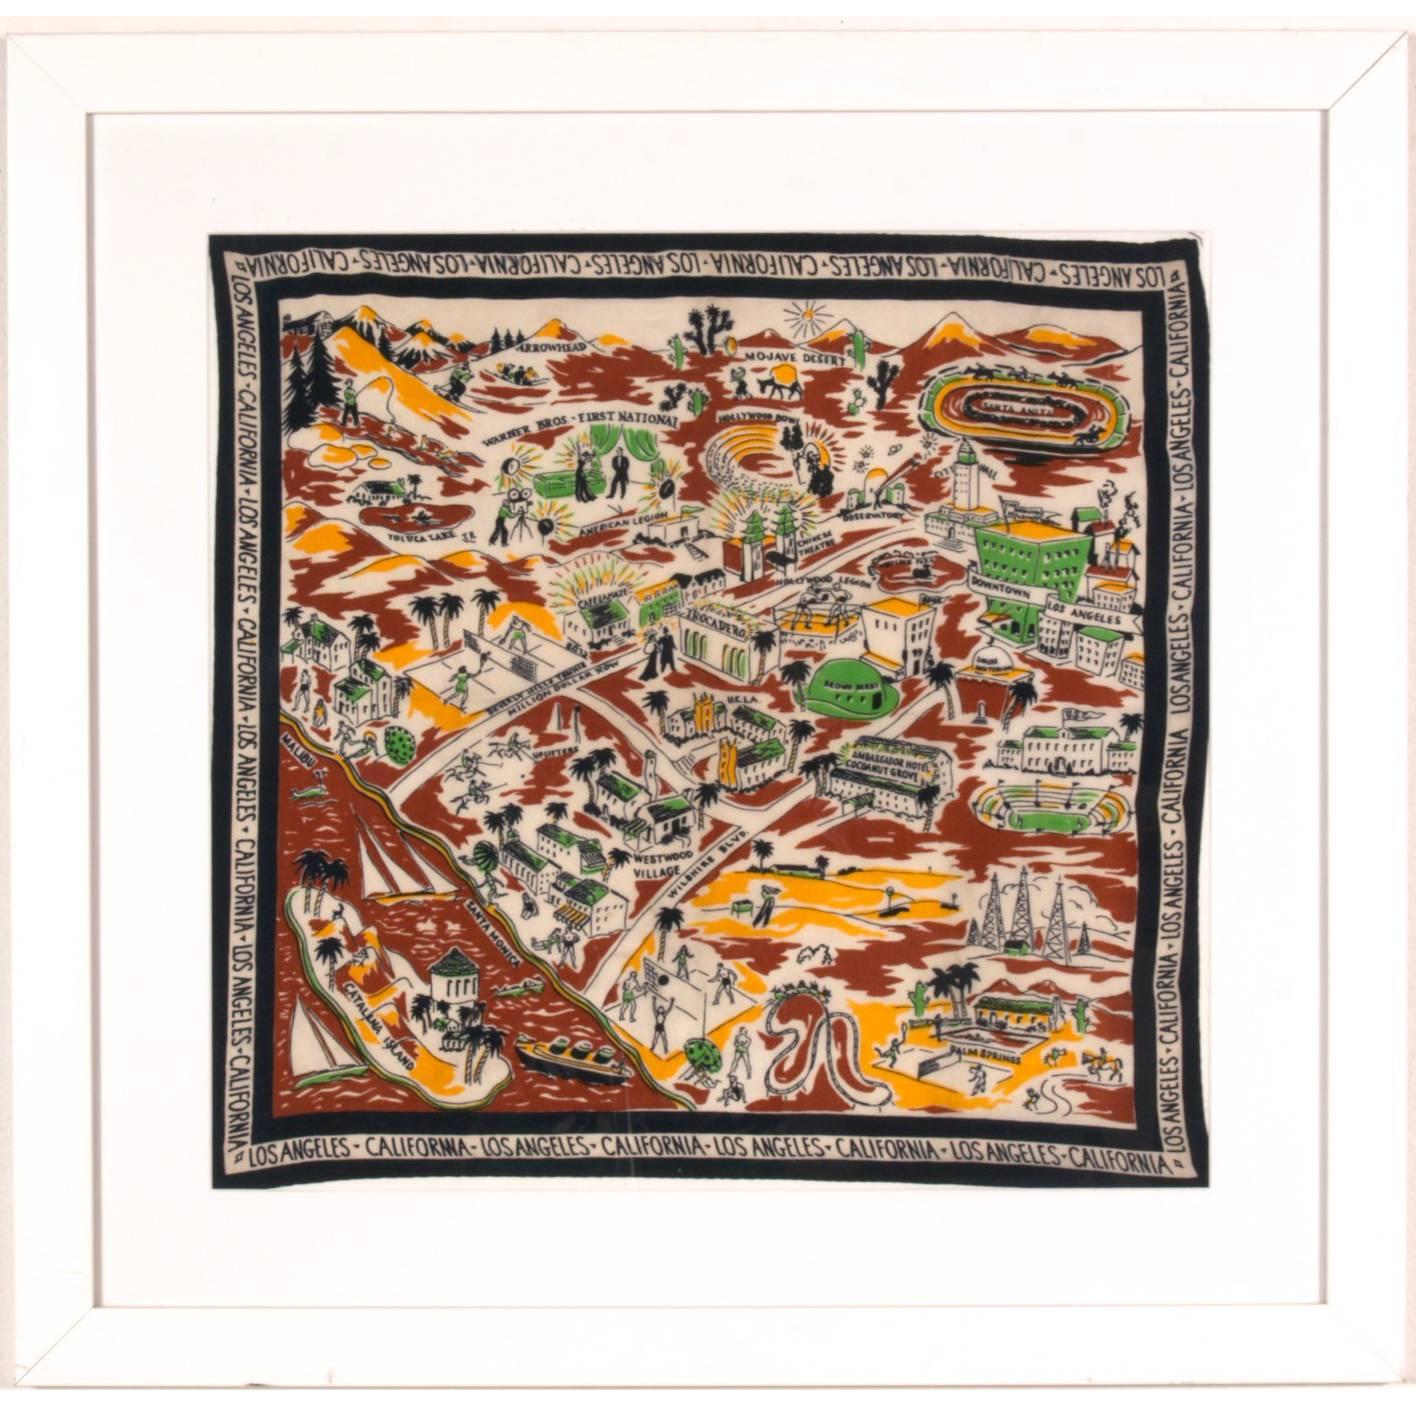 Los Angeles Area, Southern California Pictorial Tourist Scarf, circa 1930s